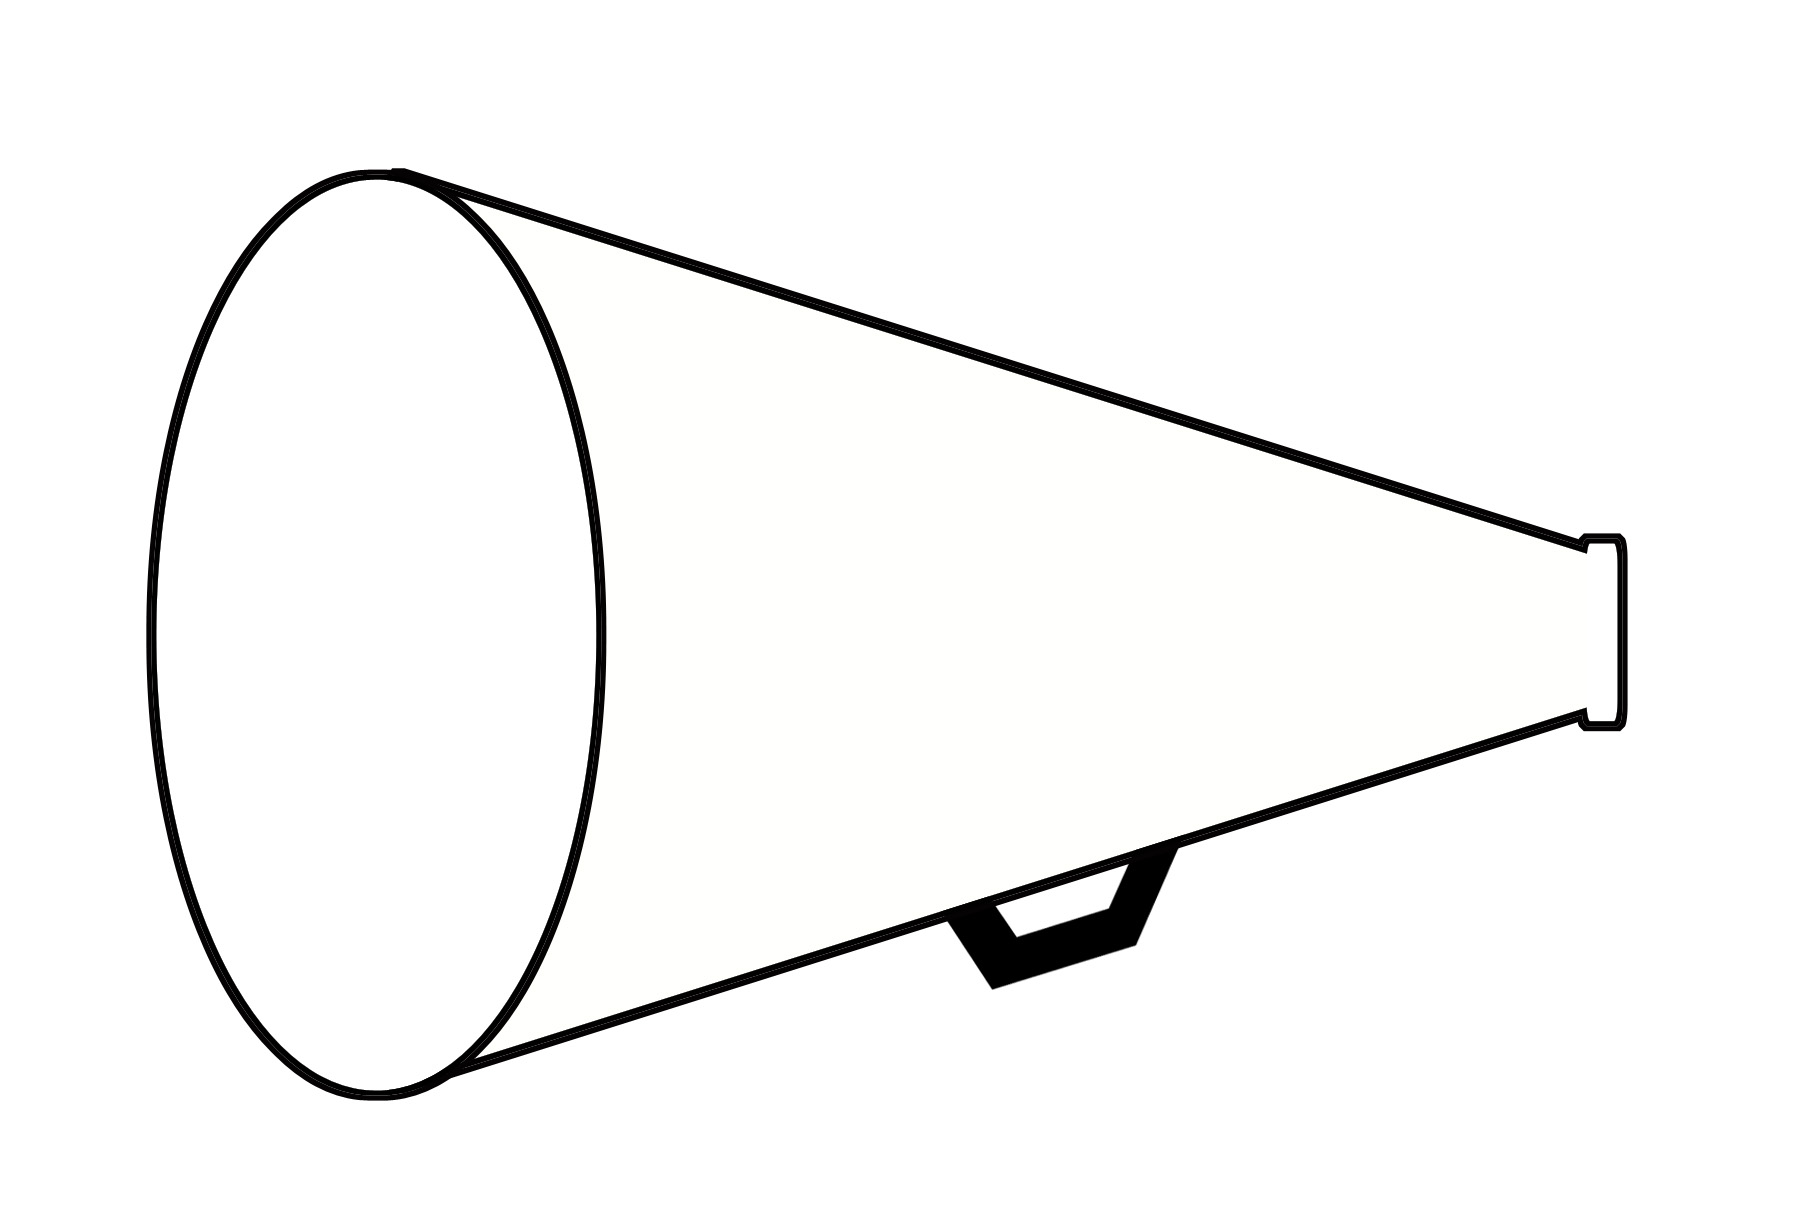 Image Of Cheerleader Megaphone Clipart 4 Cheer Megaphone Clip - Cheer Megaphone And Poms, Transparent background PNG HD thumbnail